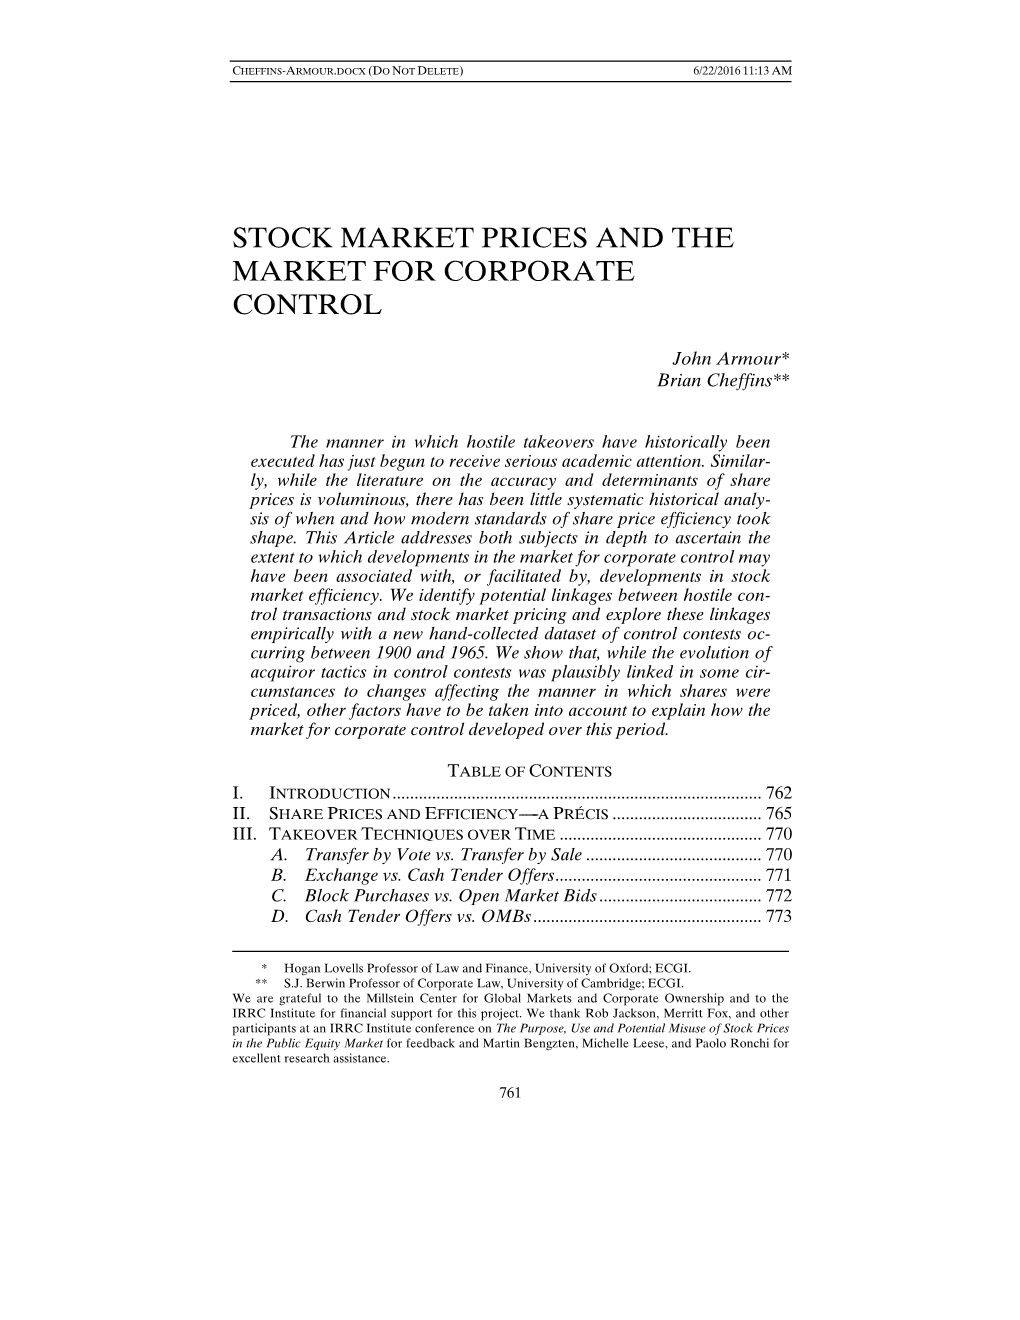 Stock Market Prices and the Market for Corporate Control